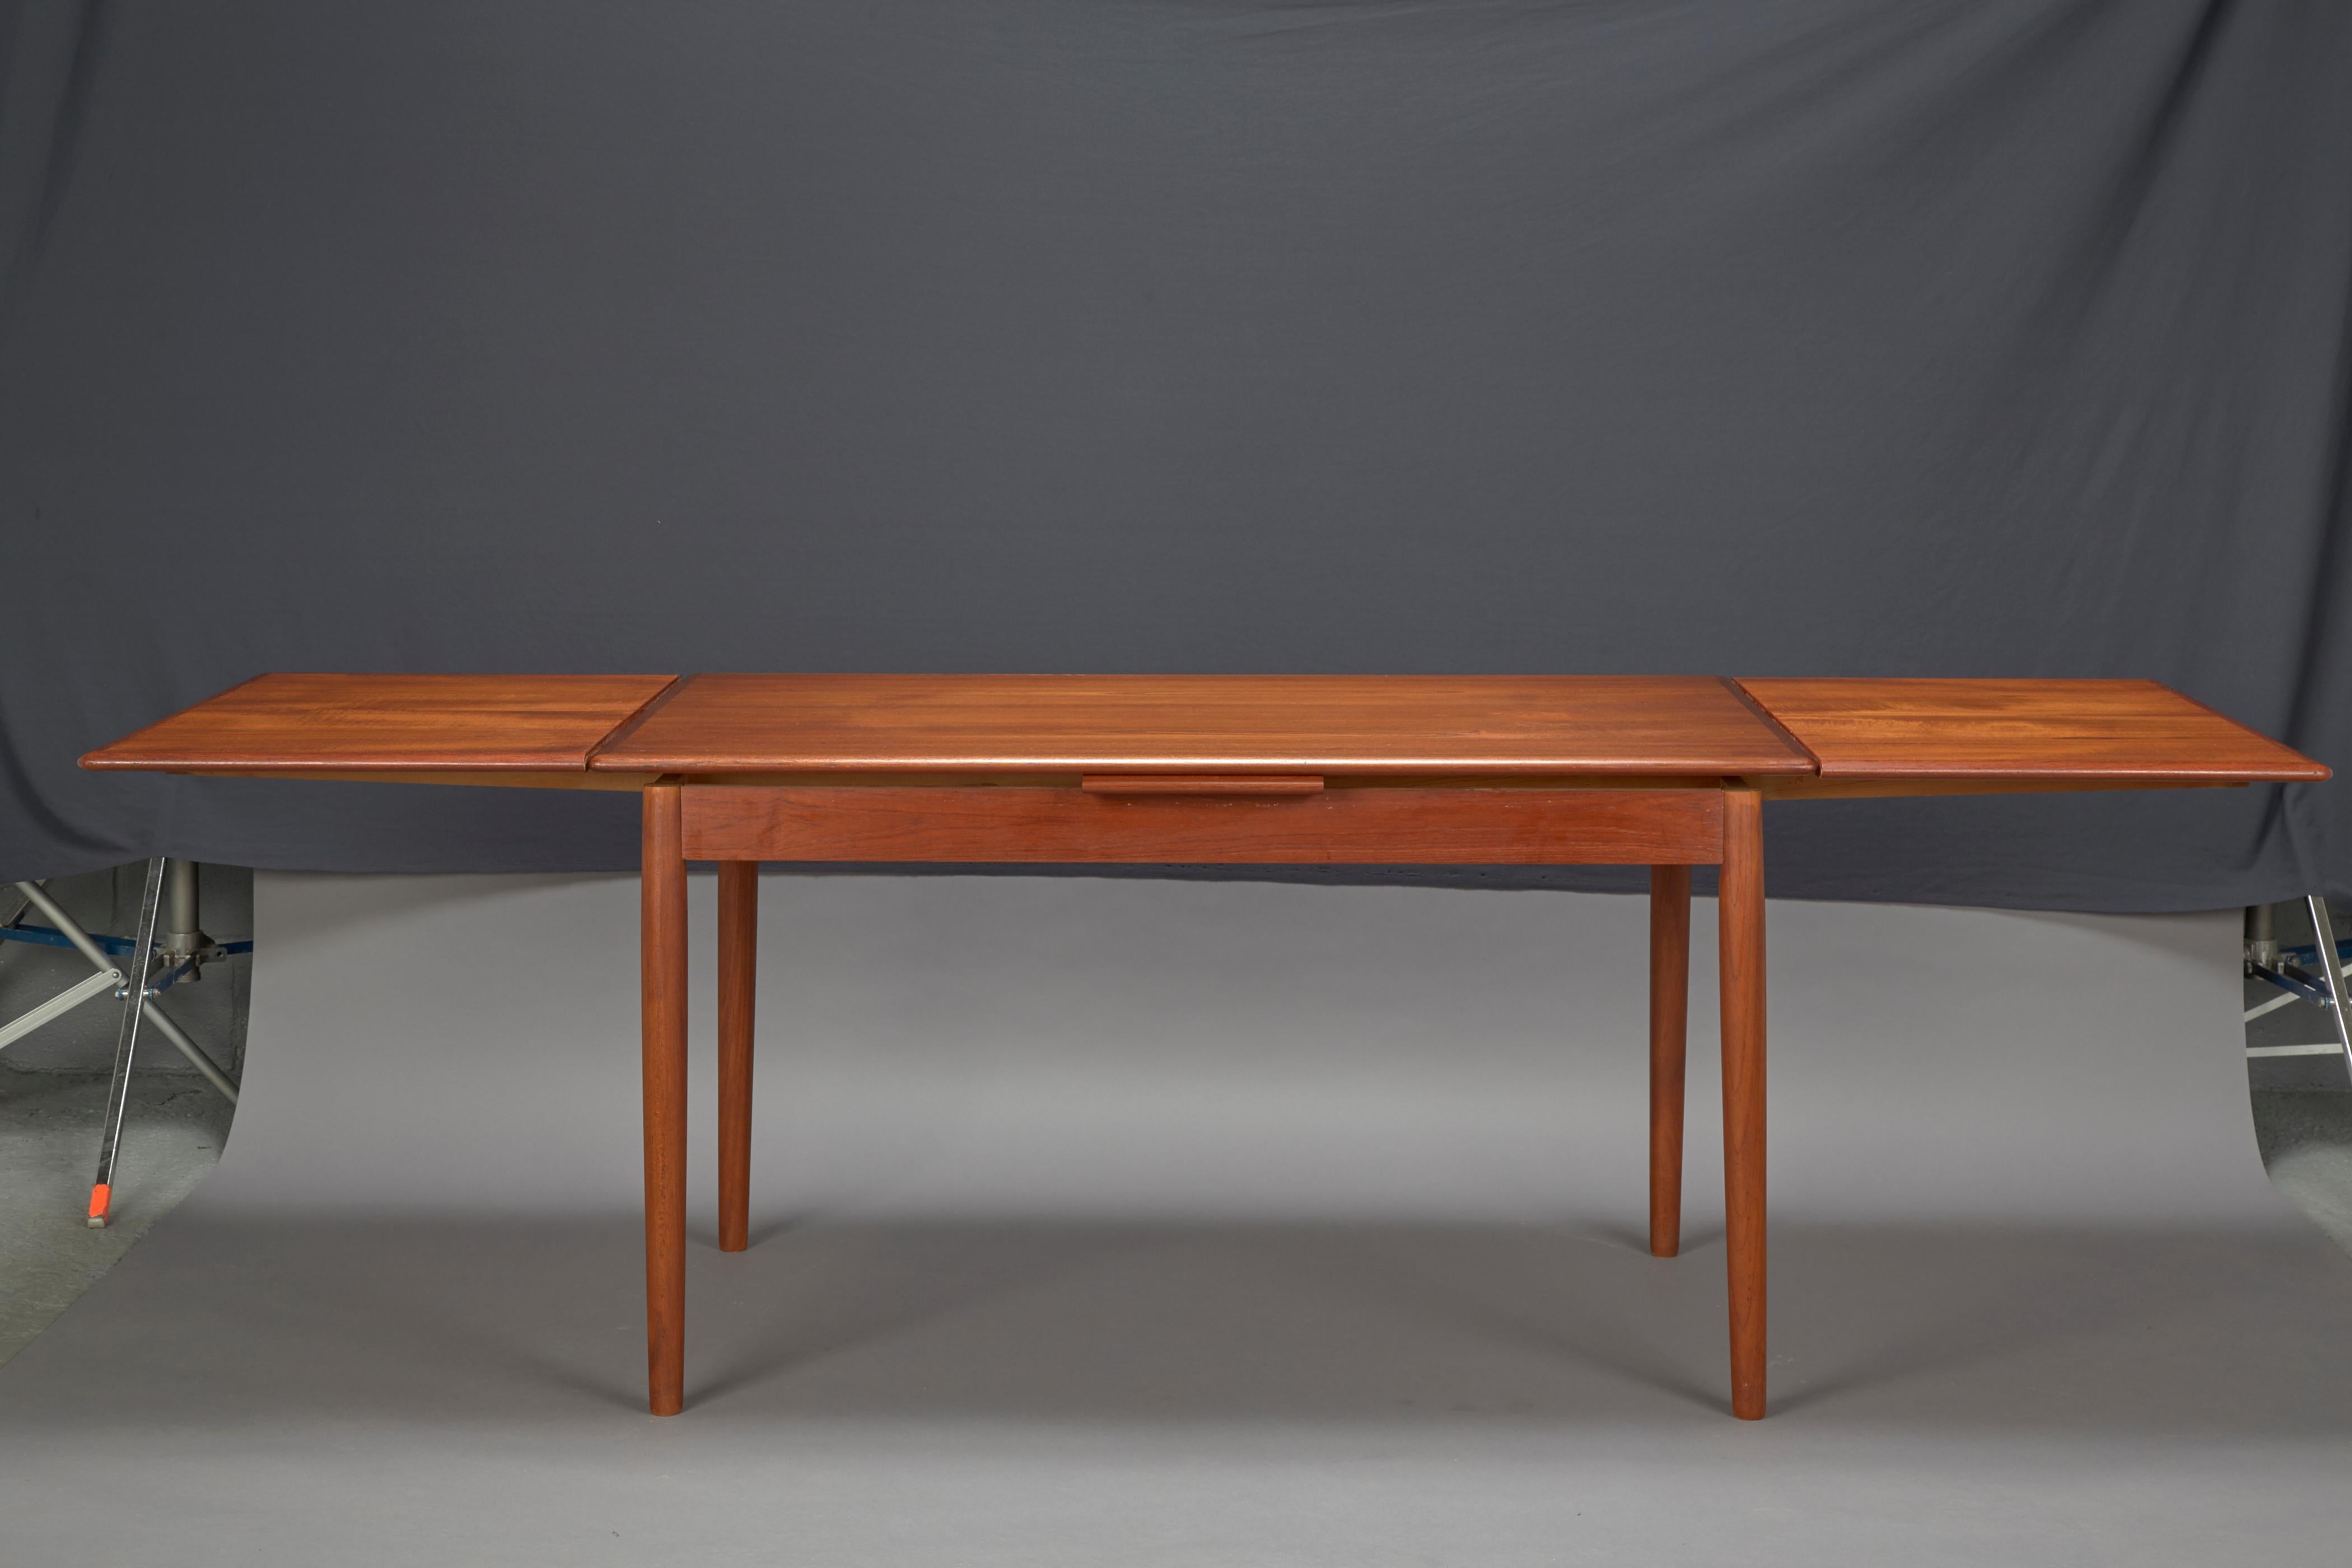 Danish modern dining table with two pull-out leaves
This table has 2- 20.5